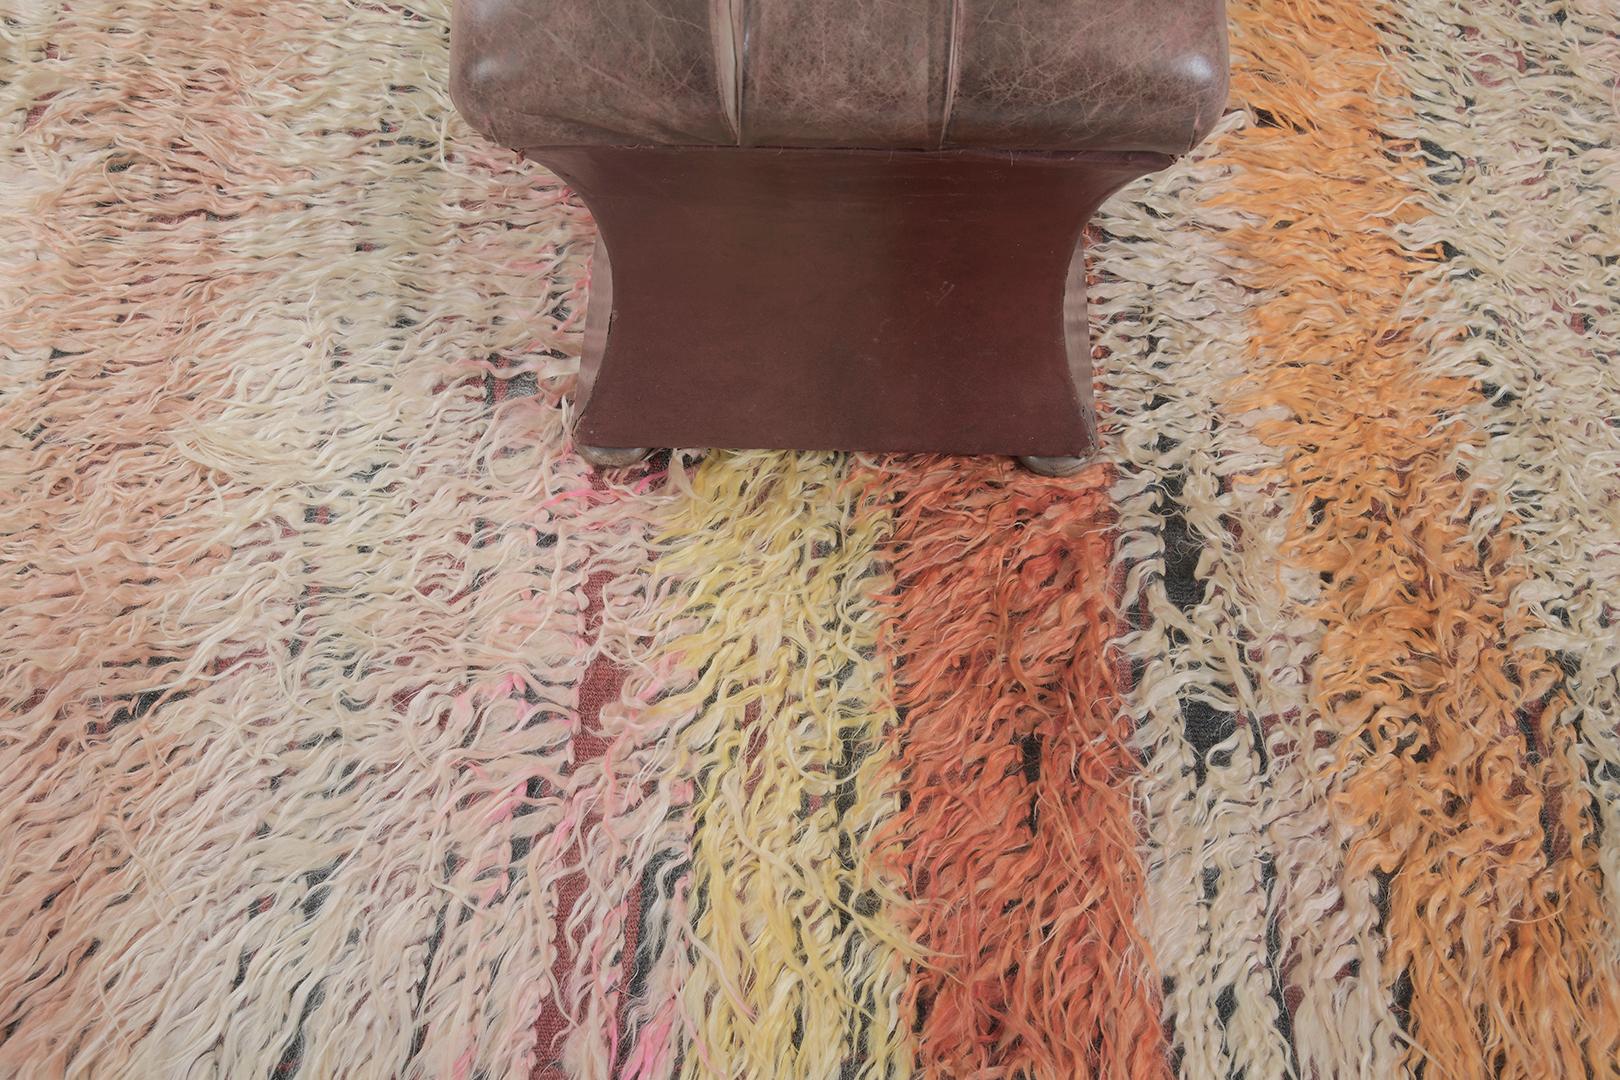 Tulu is a luxurious wool shag that features layers of variegated tones of rose, ivory, cream, peach, and nude. It augments the stunning scenery and all will be loved by the next generation. Turkish Anatolian rugs weave together dyes and colors,